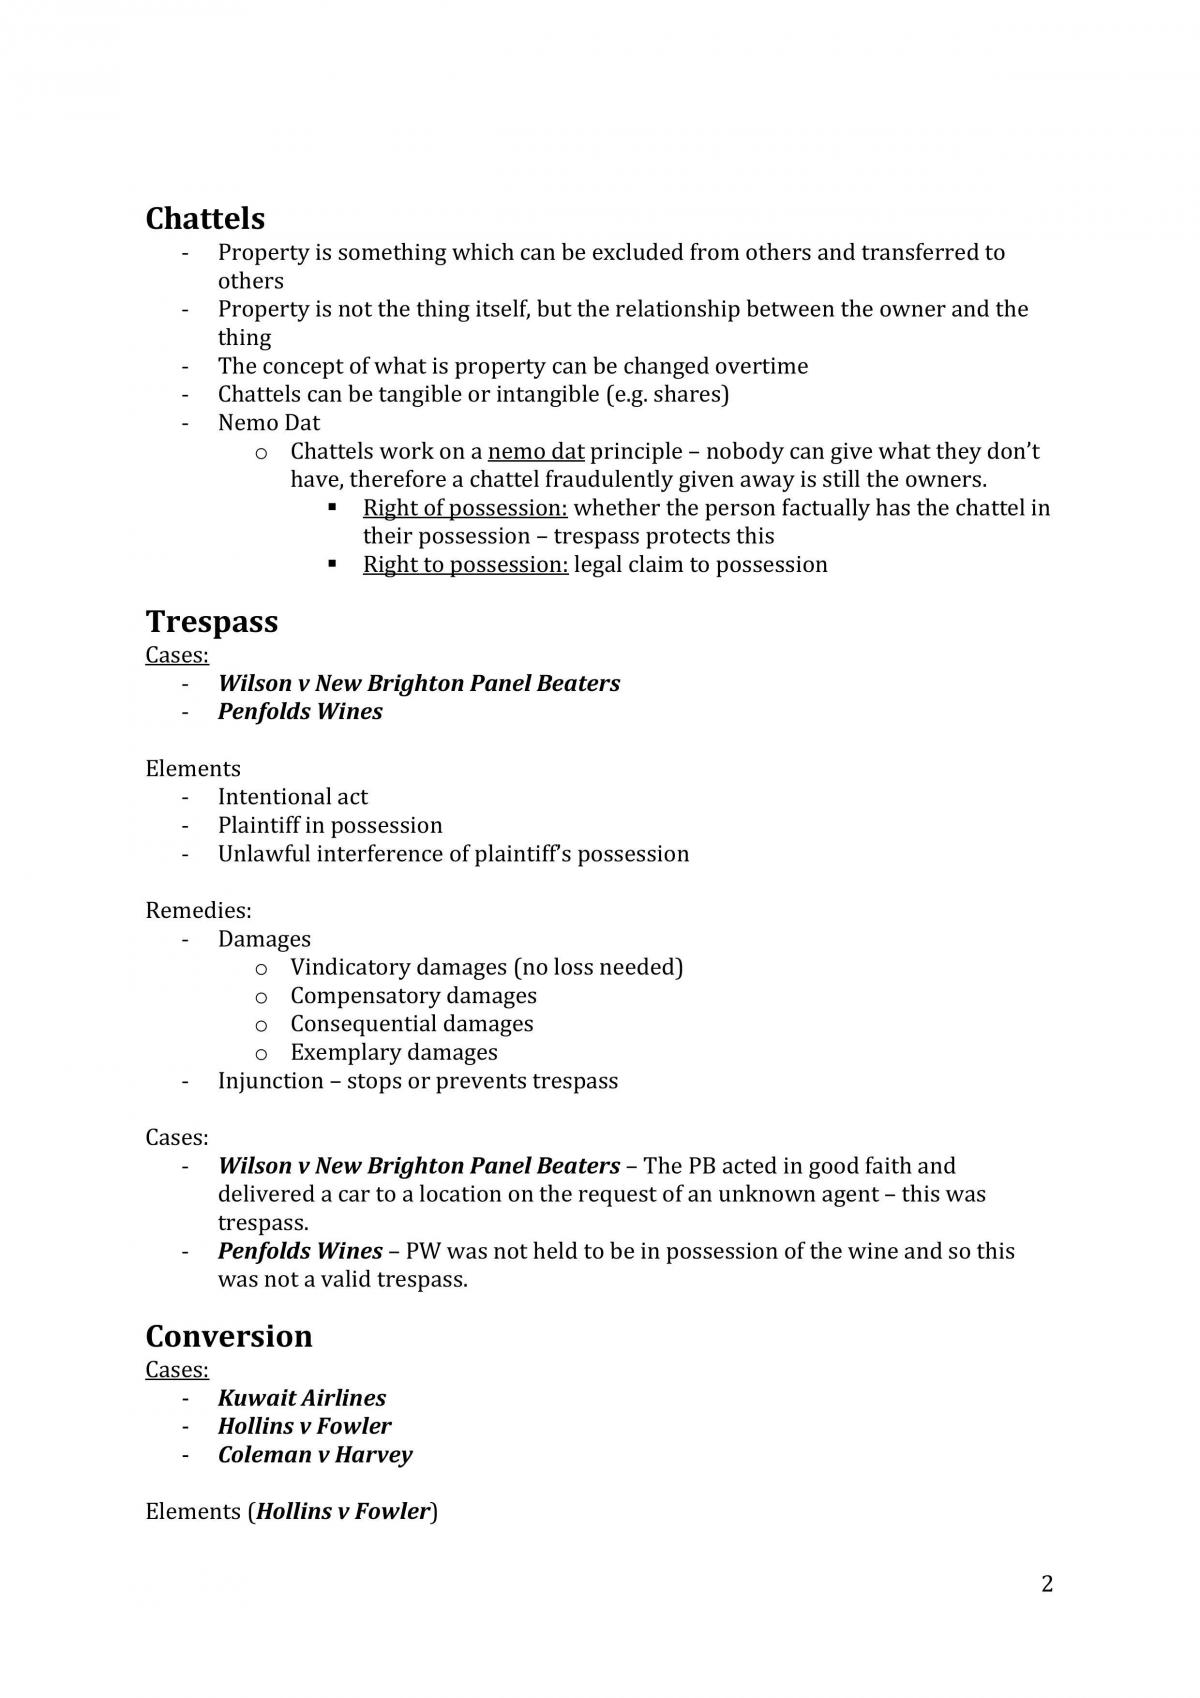 LAWS203 Property Law full course summary notes - Page 2